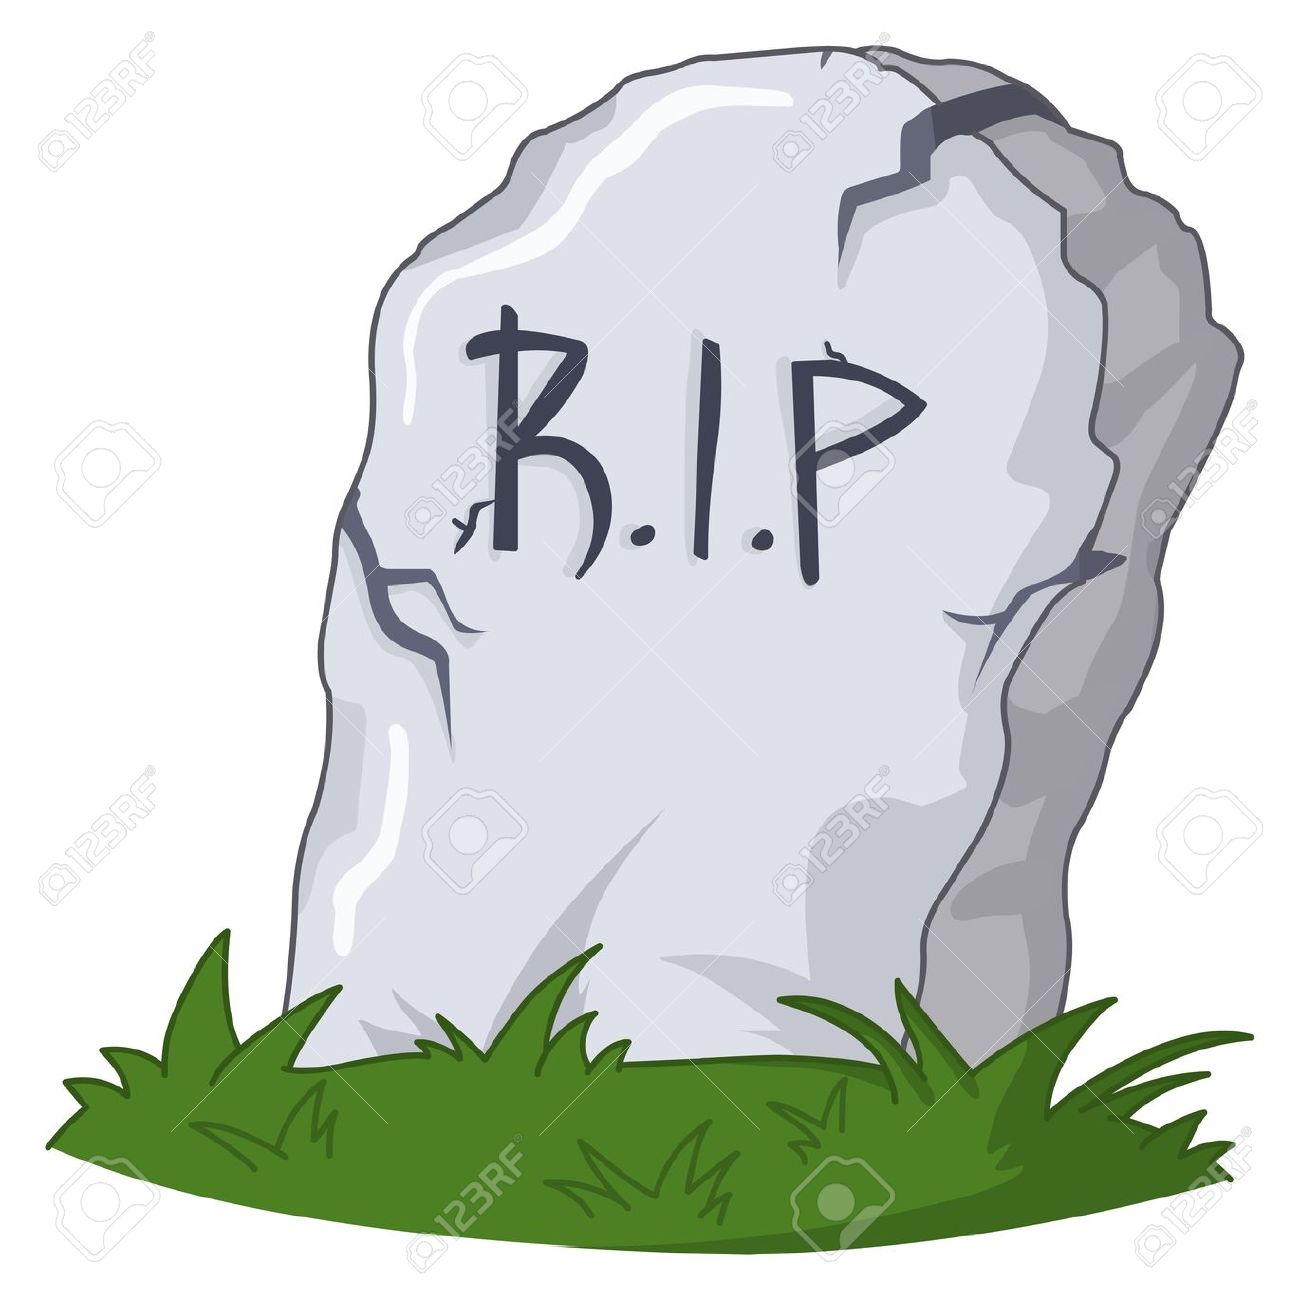 grave: Tombstone - Grave Clipart